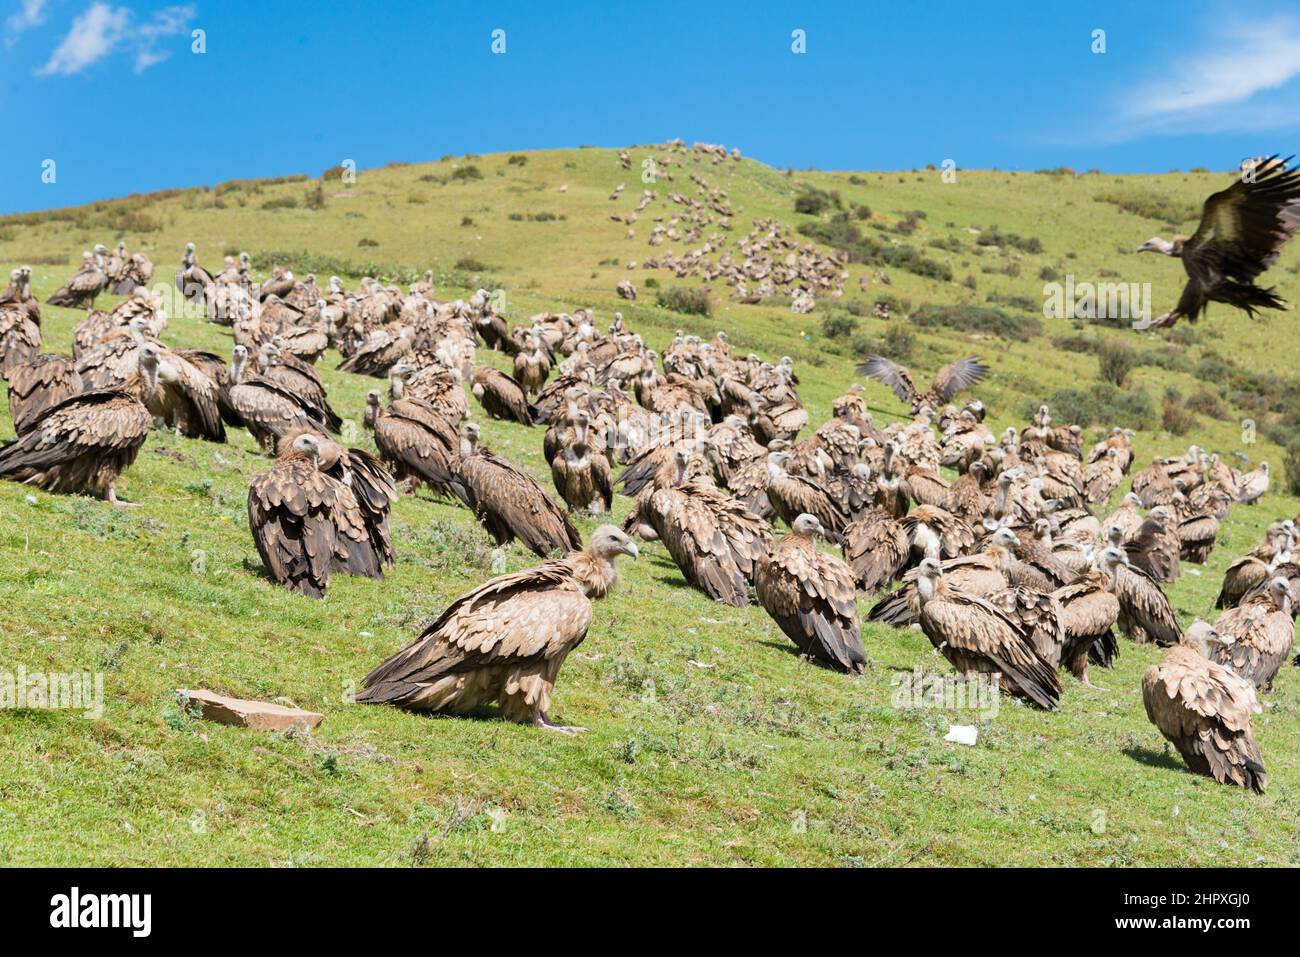 SICHUAN, CHINA - Vulture at Sky burial site in Larung Gar. a famous Lamasery in Seda, Sichuan, China. Stock Photo